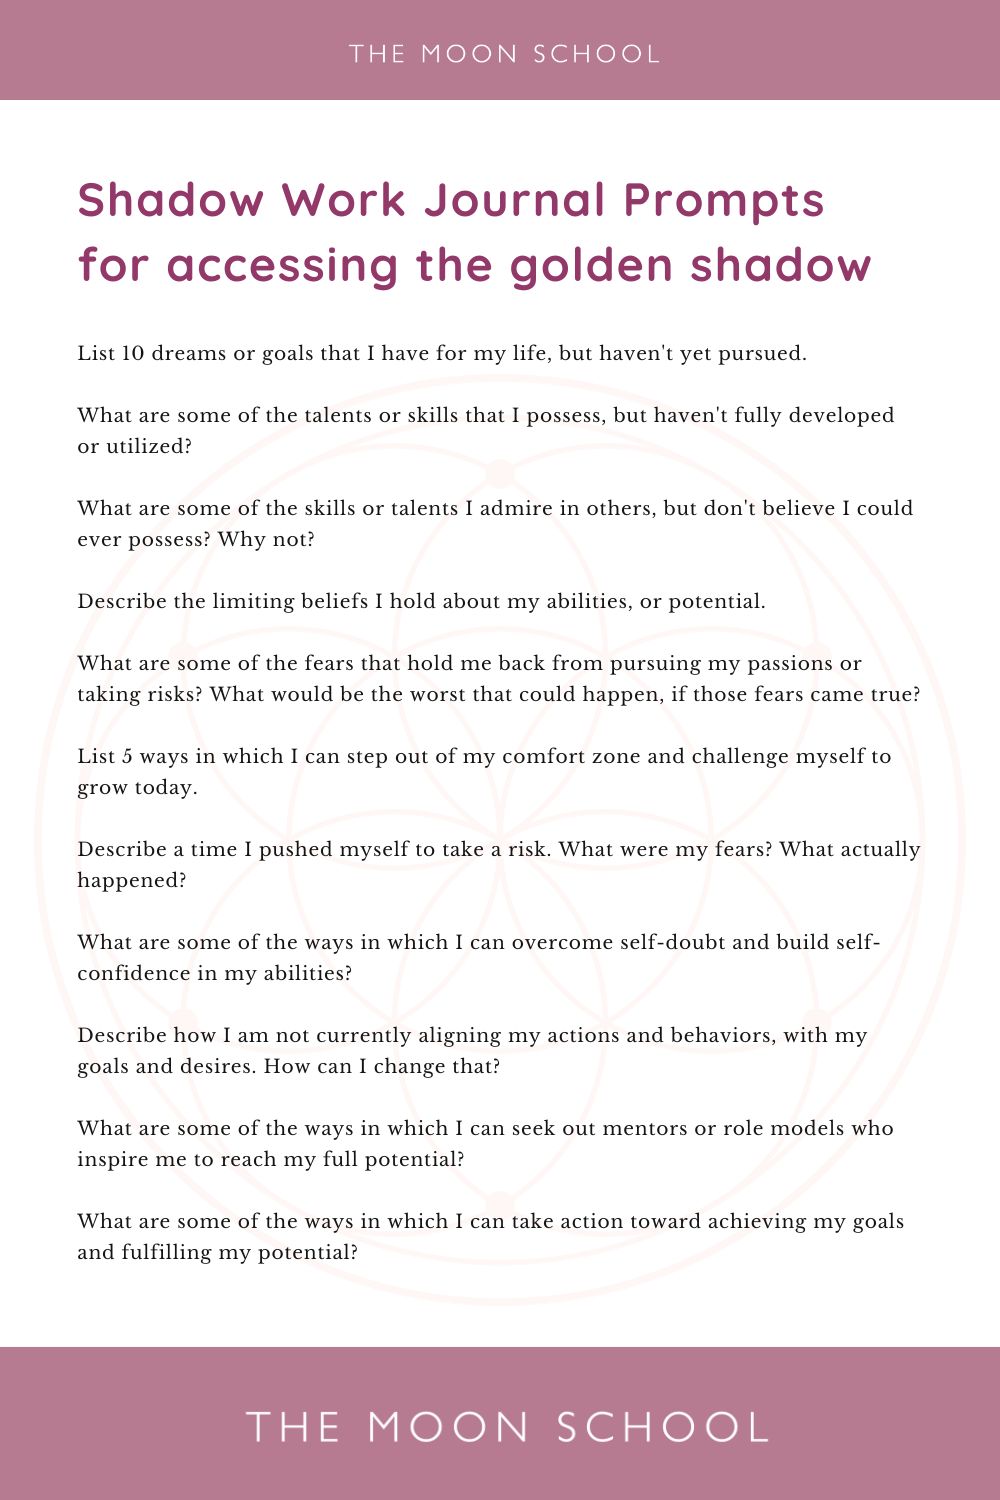 list of journal prompts to access the golden shadow potential